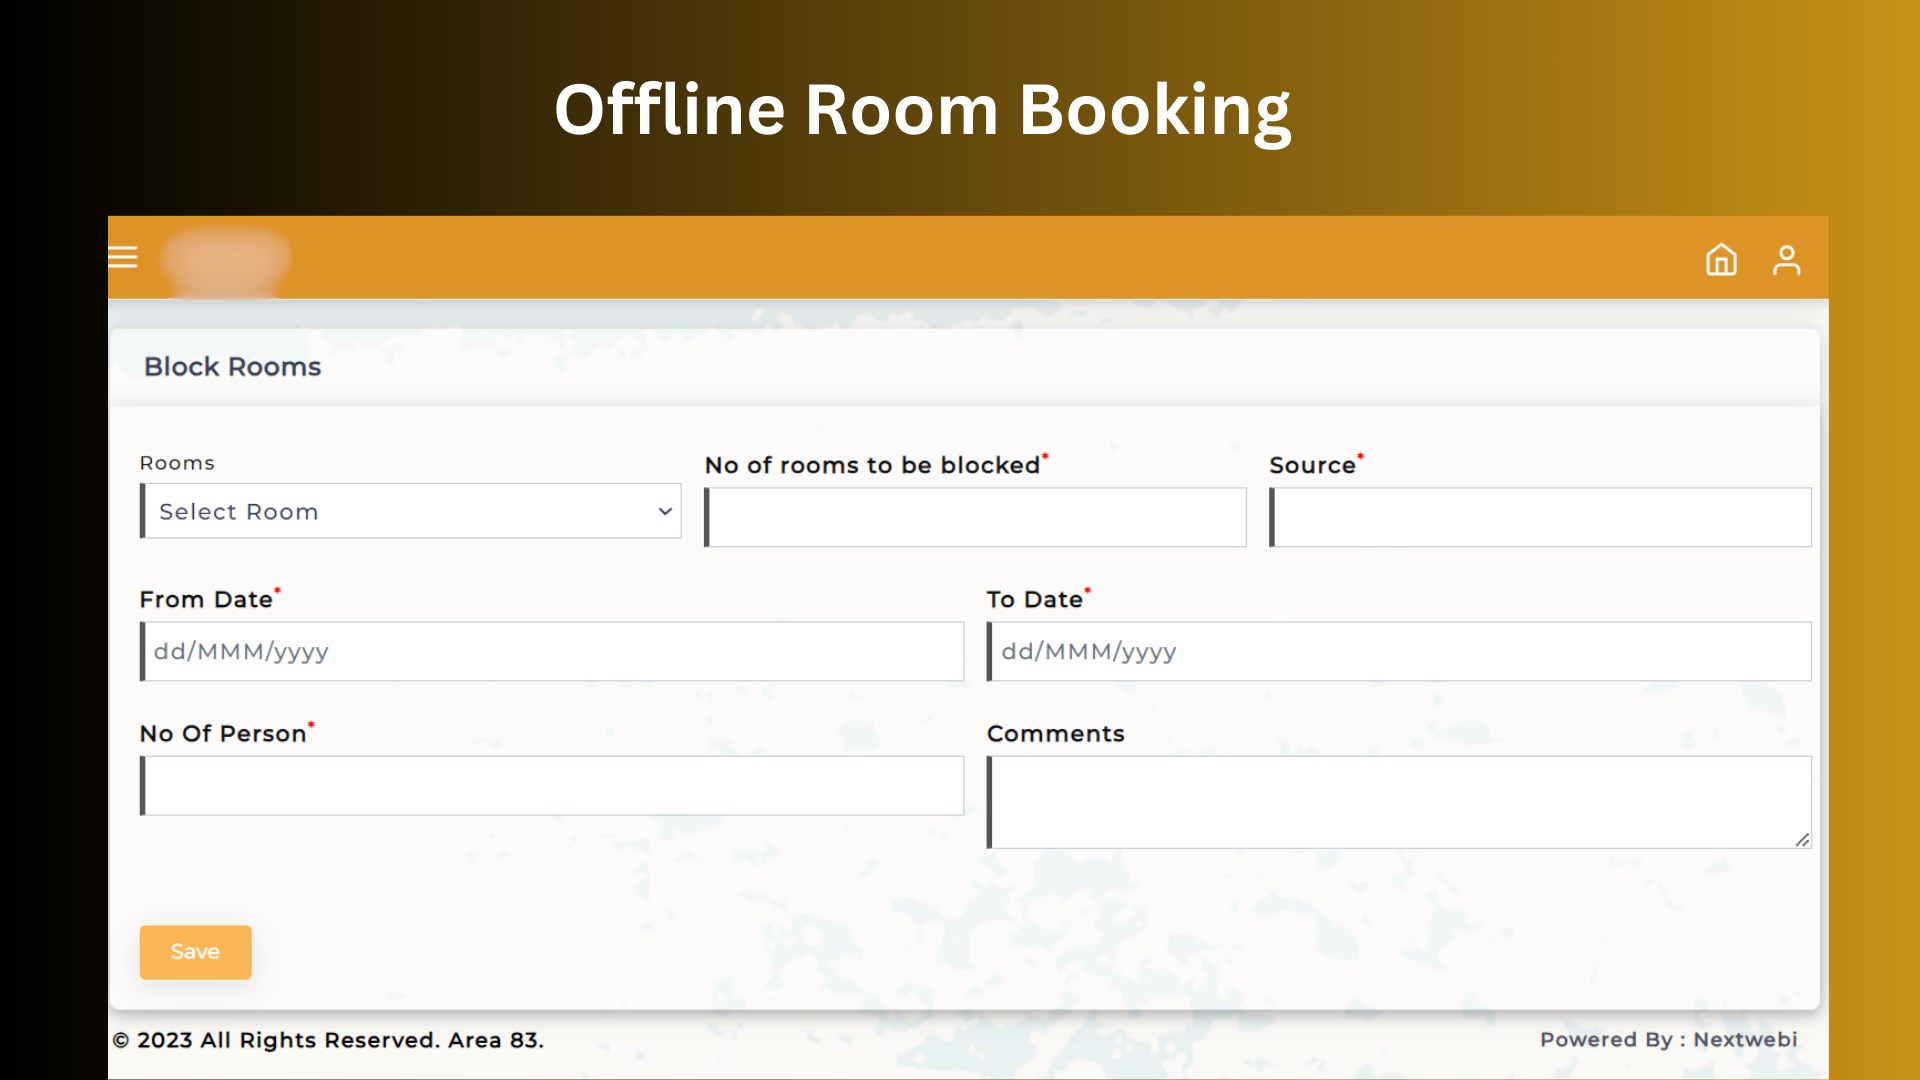 Integrated offline room booking functionality specifically for resort visitors, providing a seamless experience for guests who prefer to book accommodations without requiring internet access.